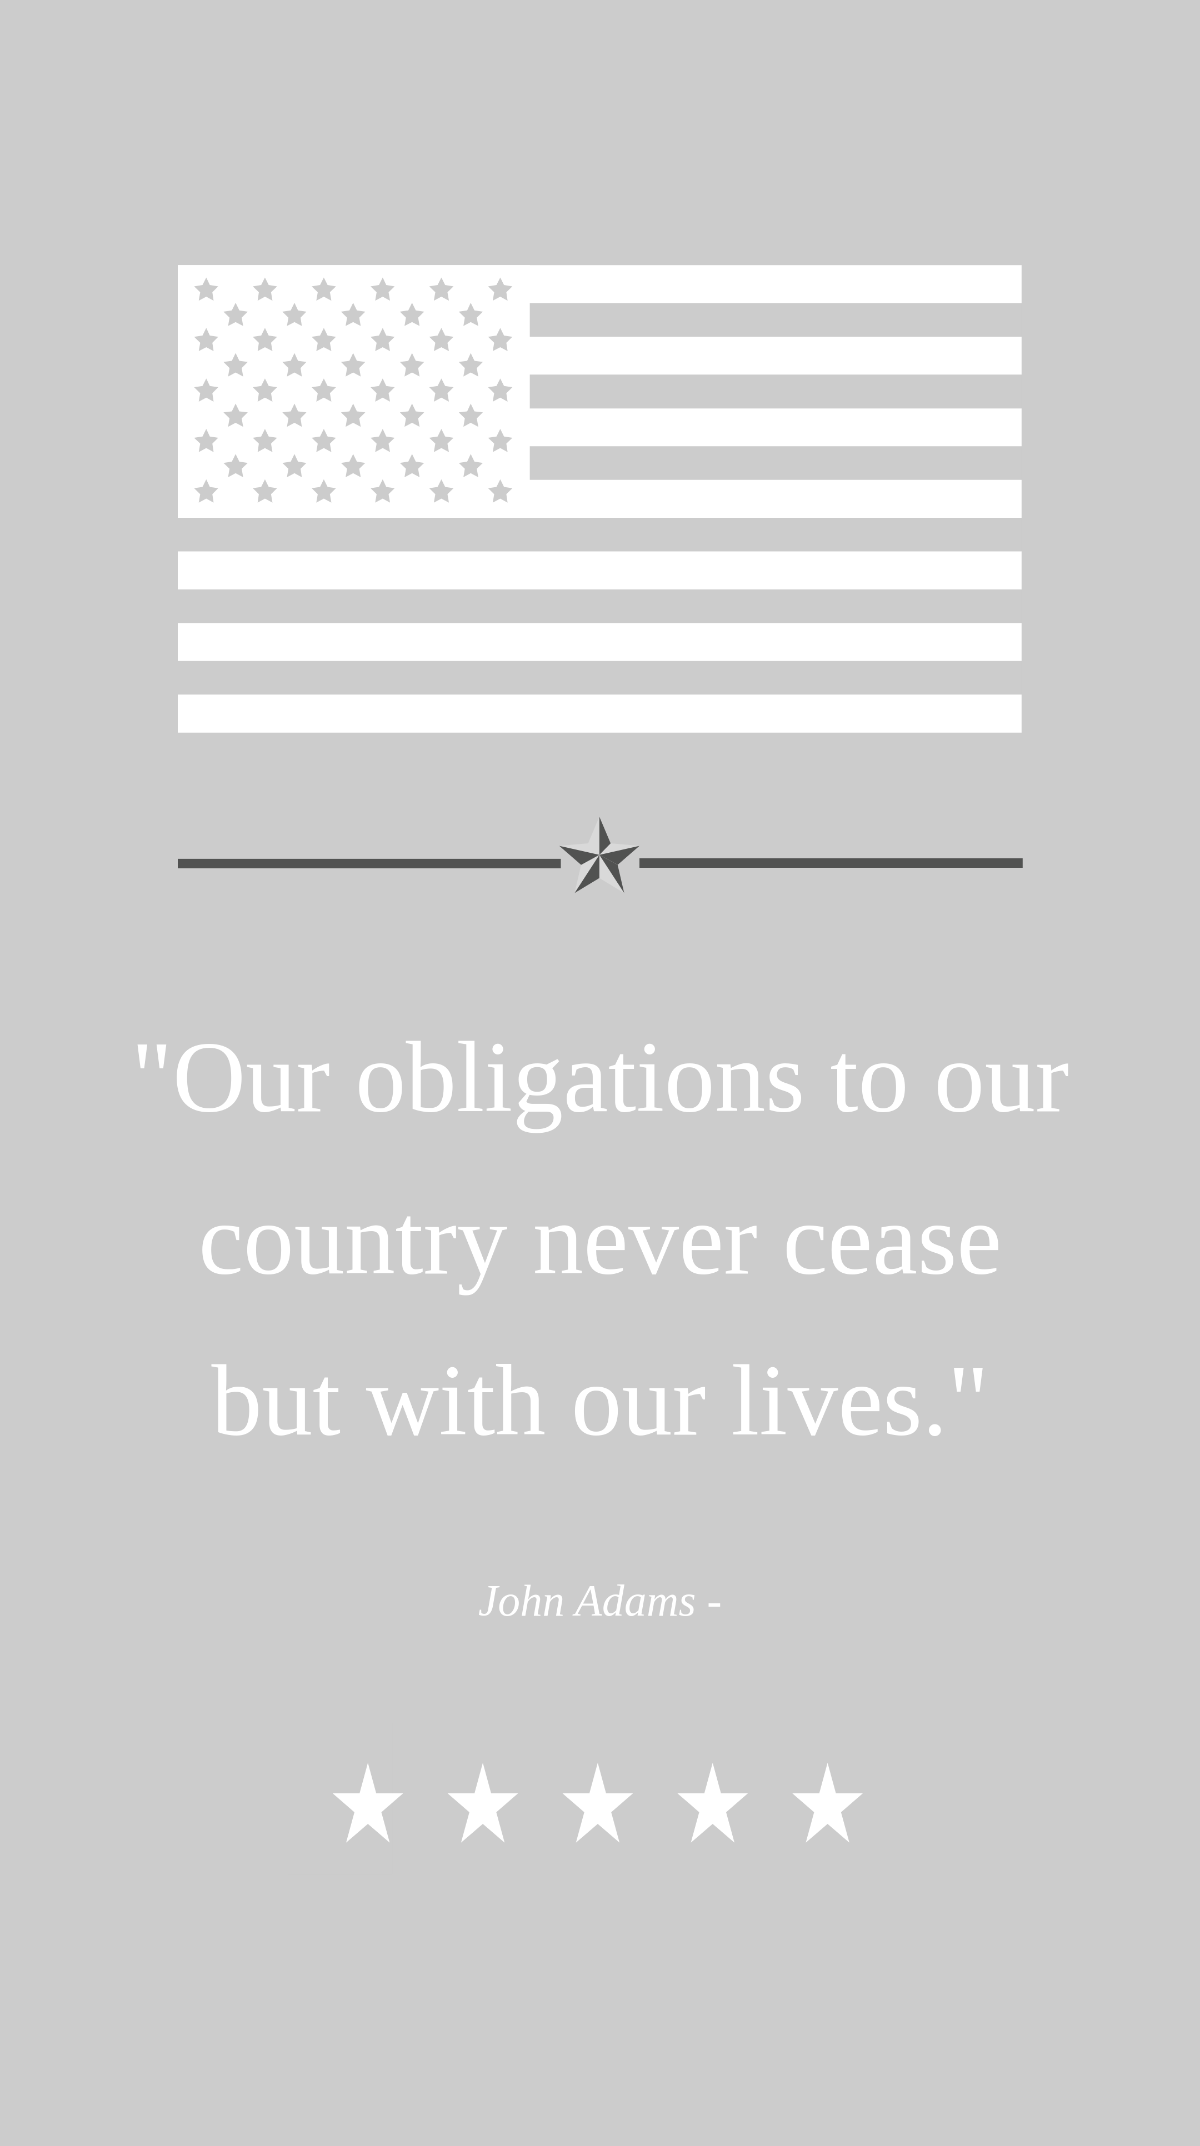 John Adams - Our obligations to our country never cease but with our lives.